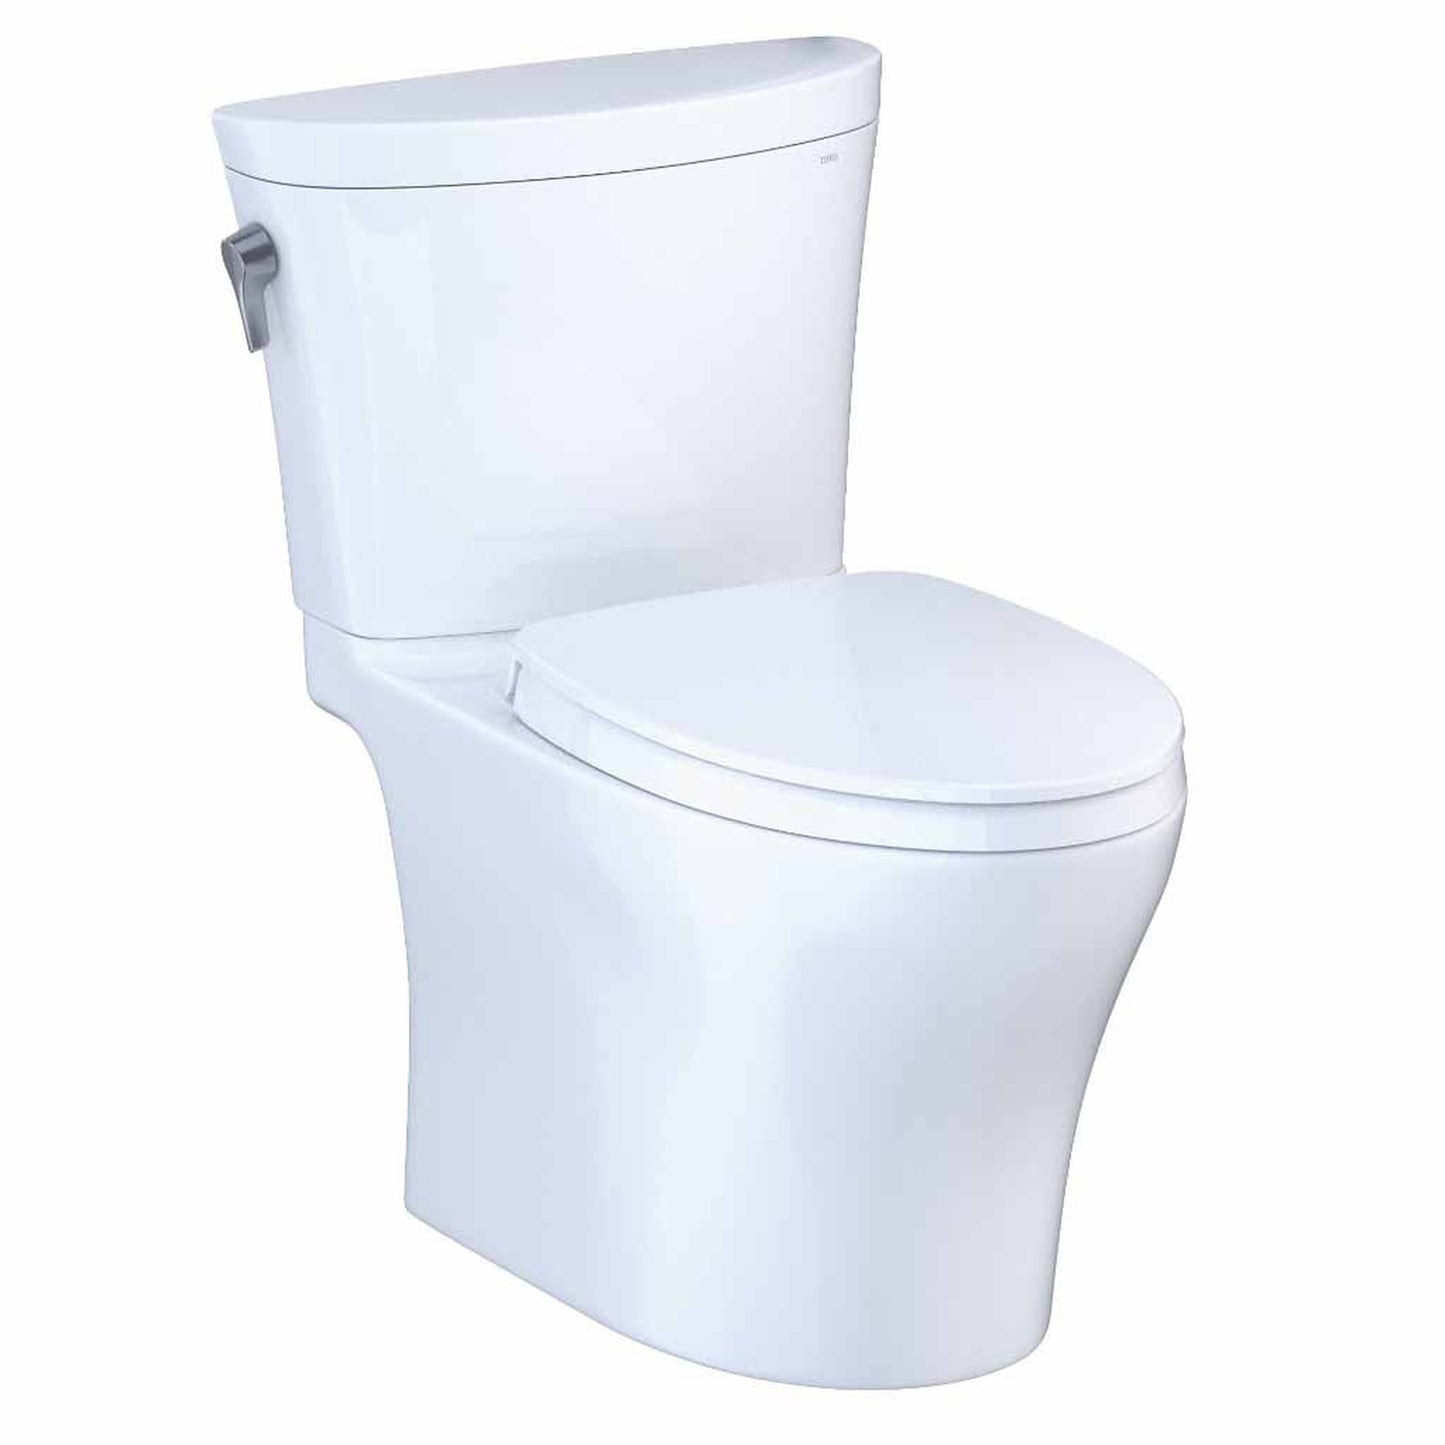 TOTO Aquia IV Arc Cotton White 1.0 GPF & 0.8 GPF Dual-Flush Two-Piece Elongated Toilet With WASHLET+ Connection - SoftClose Seat Included